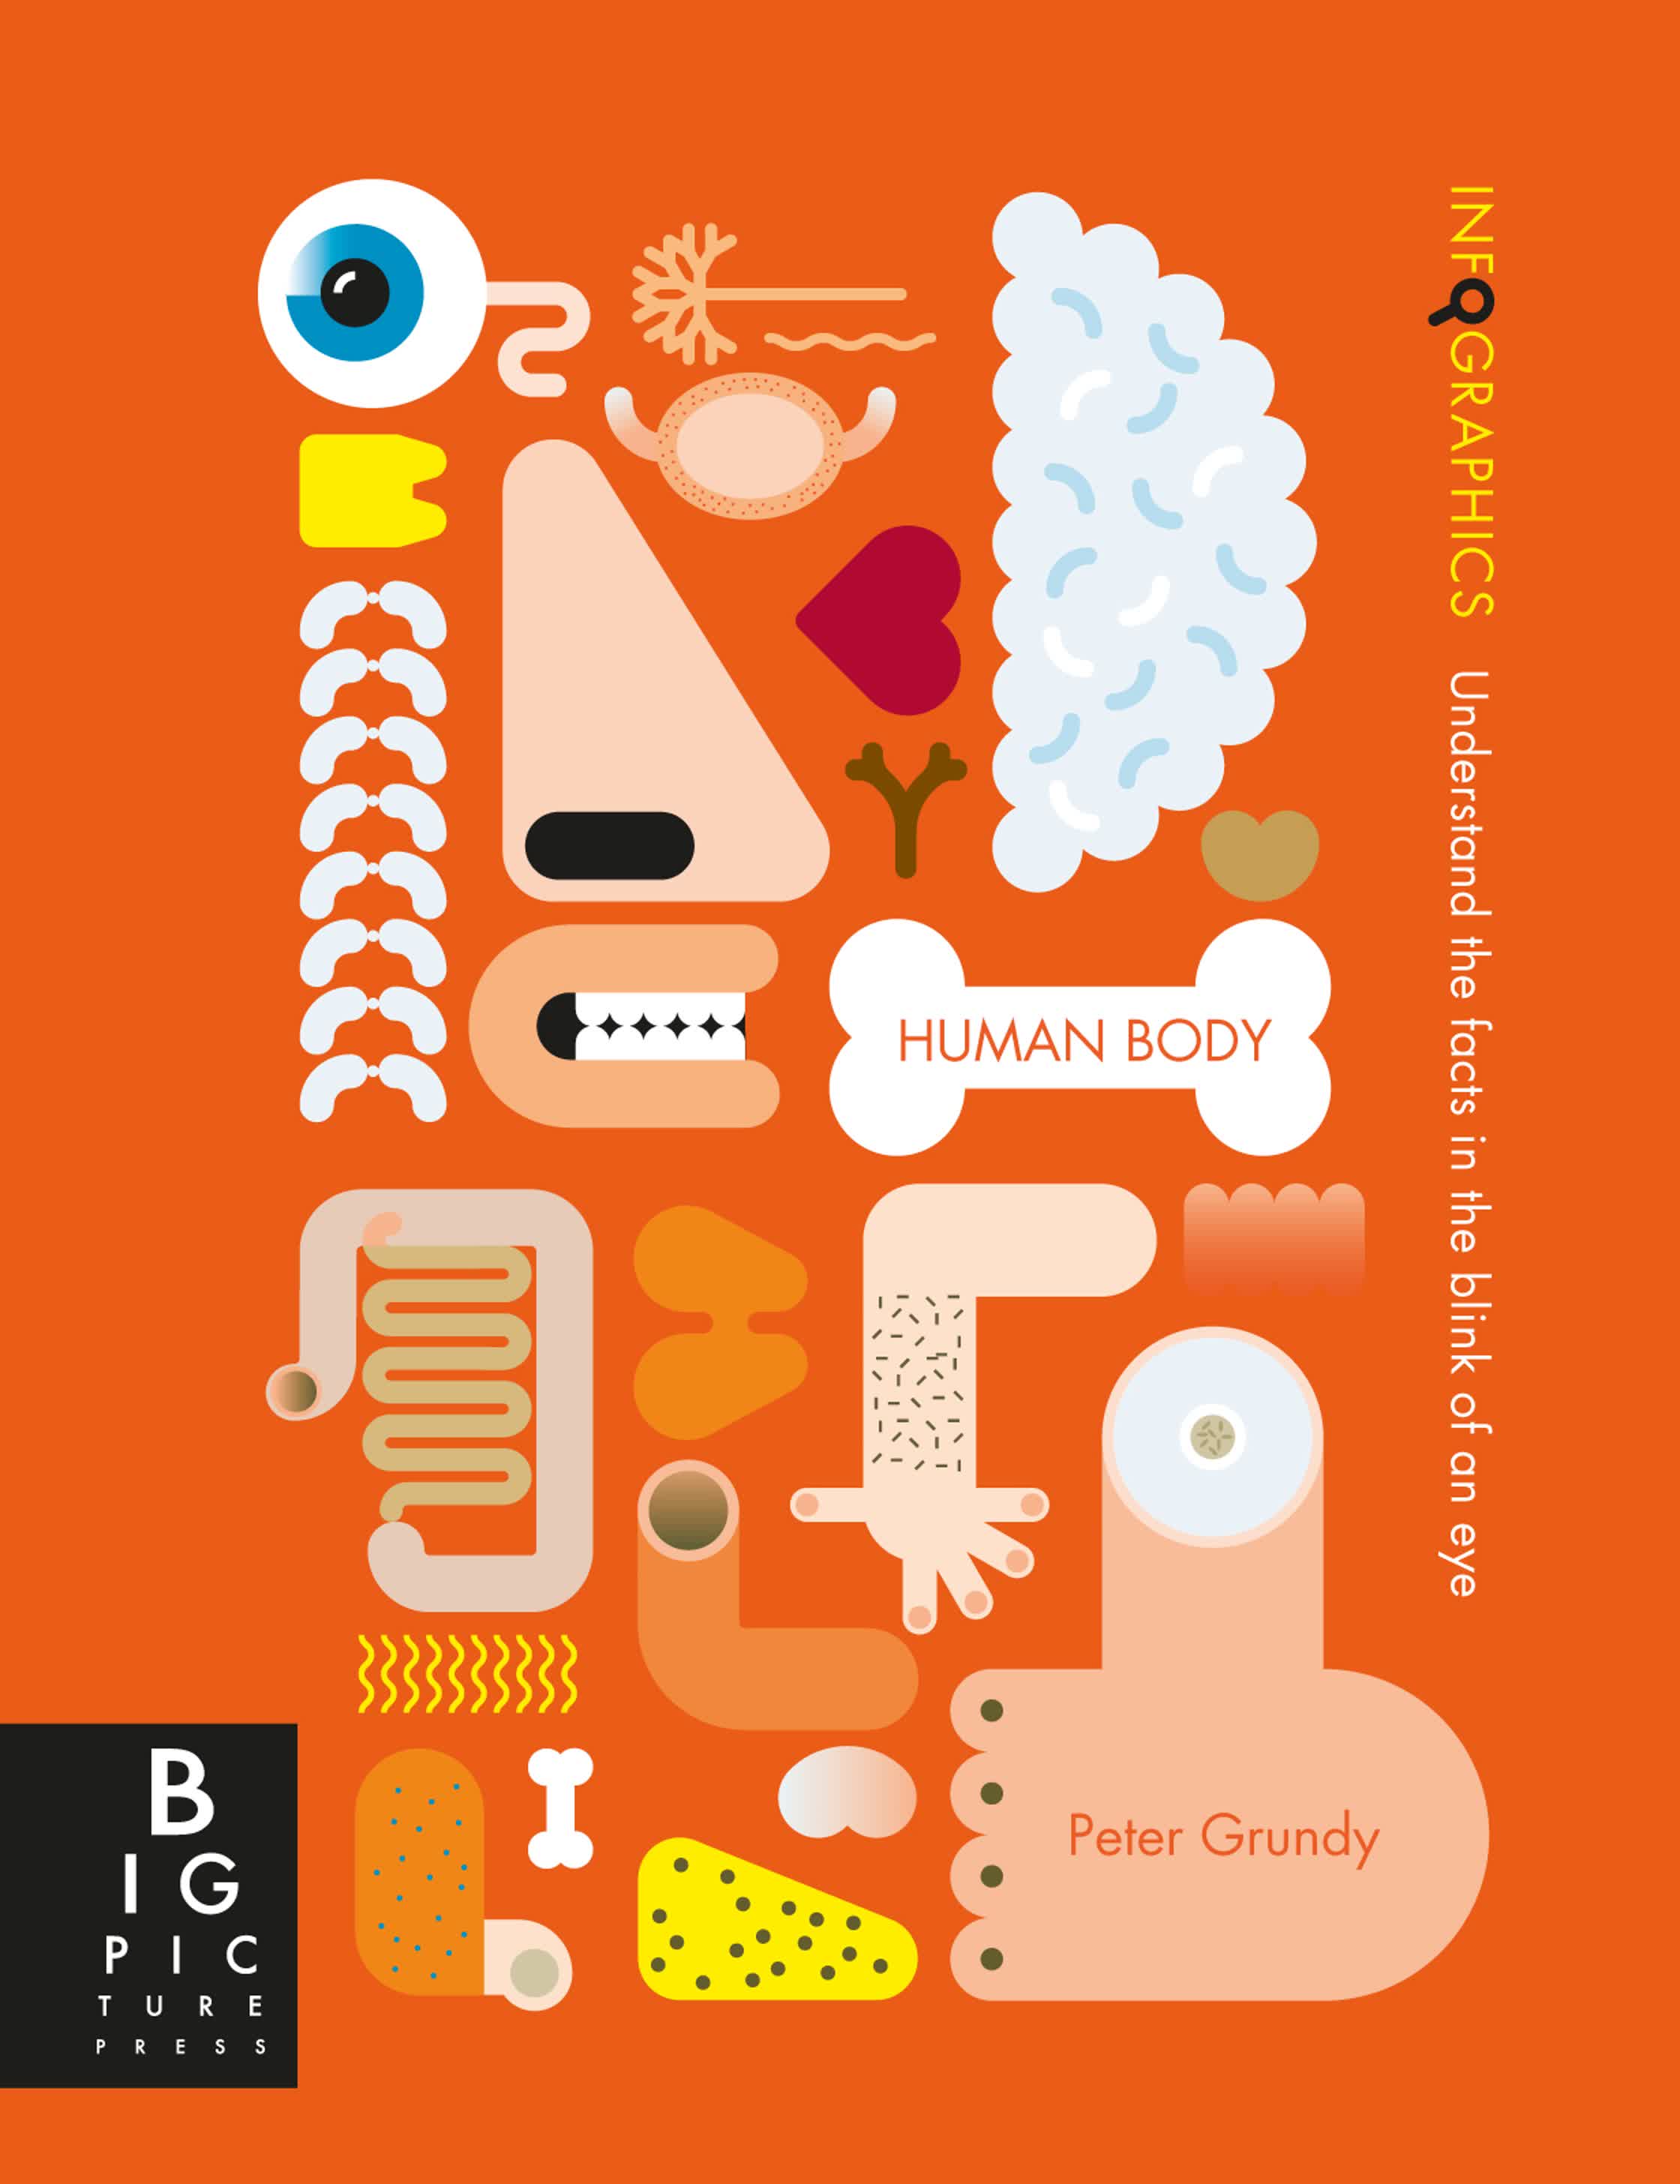 humanbody cover:big picture press.jpg